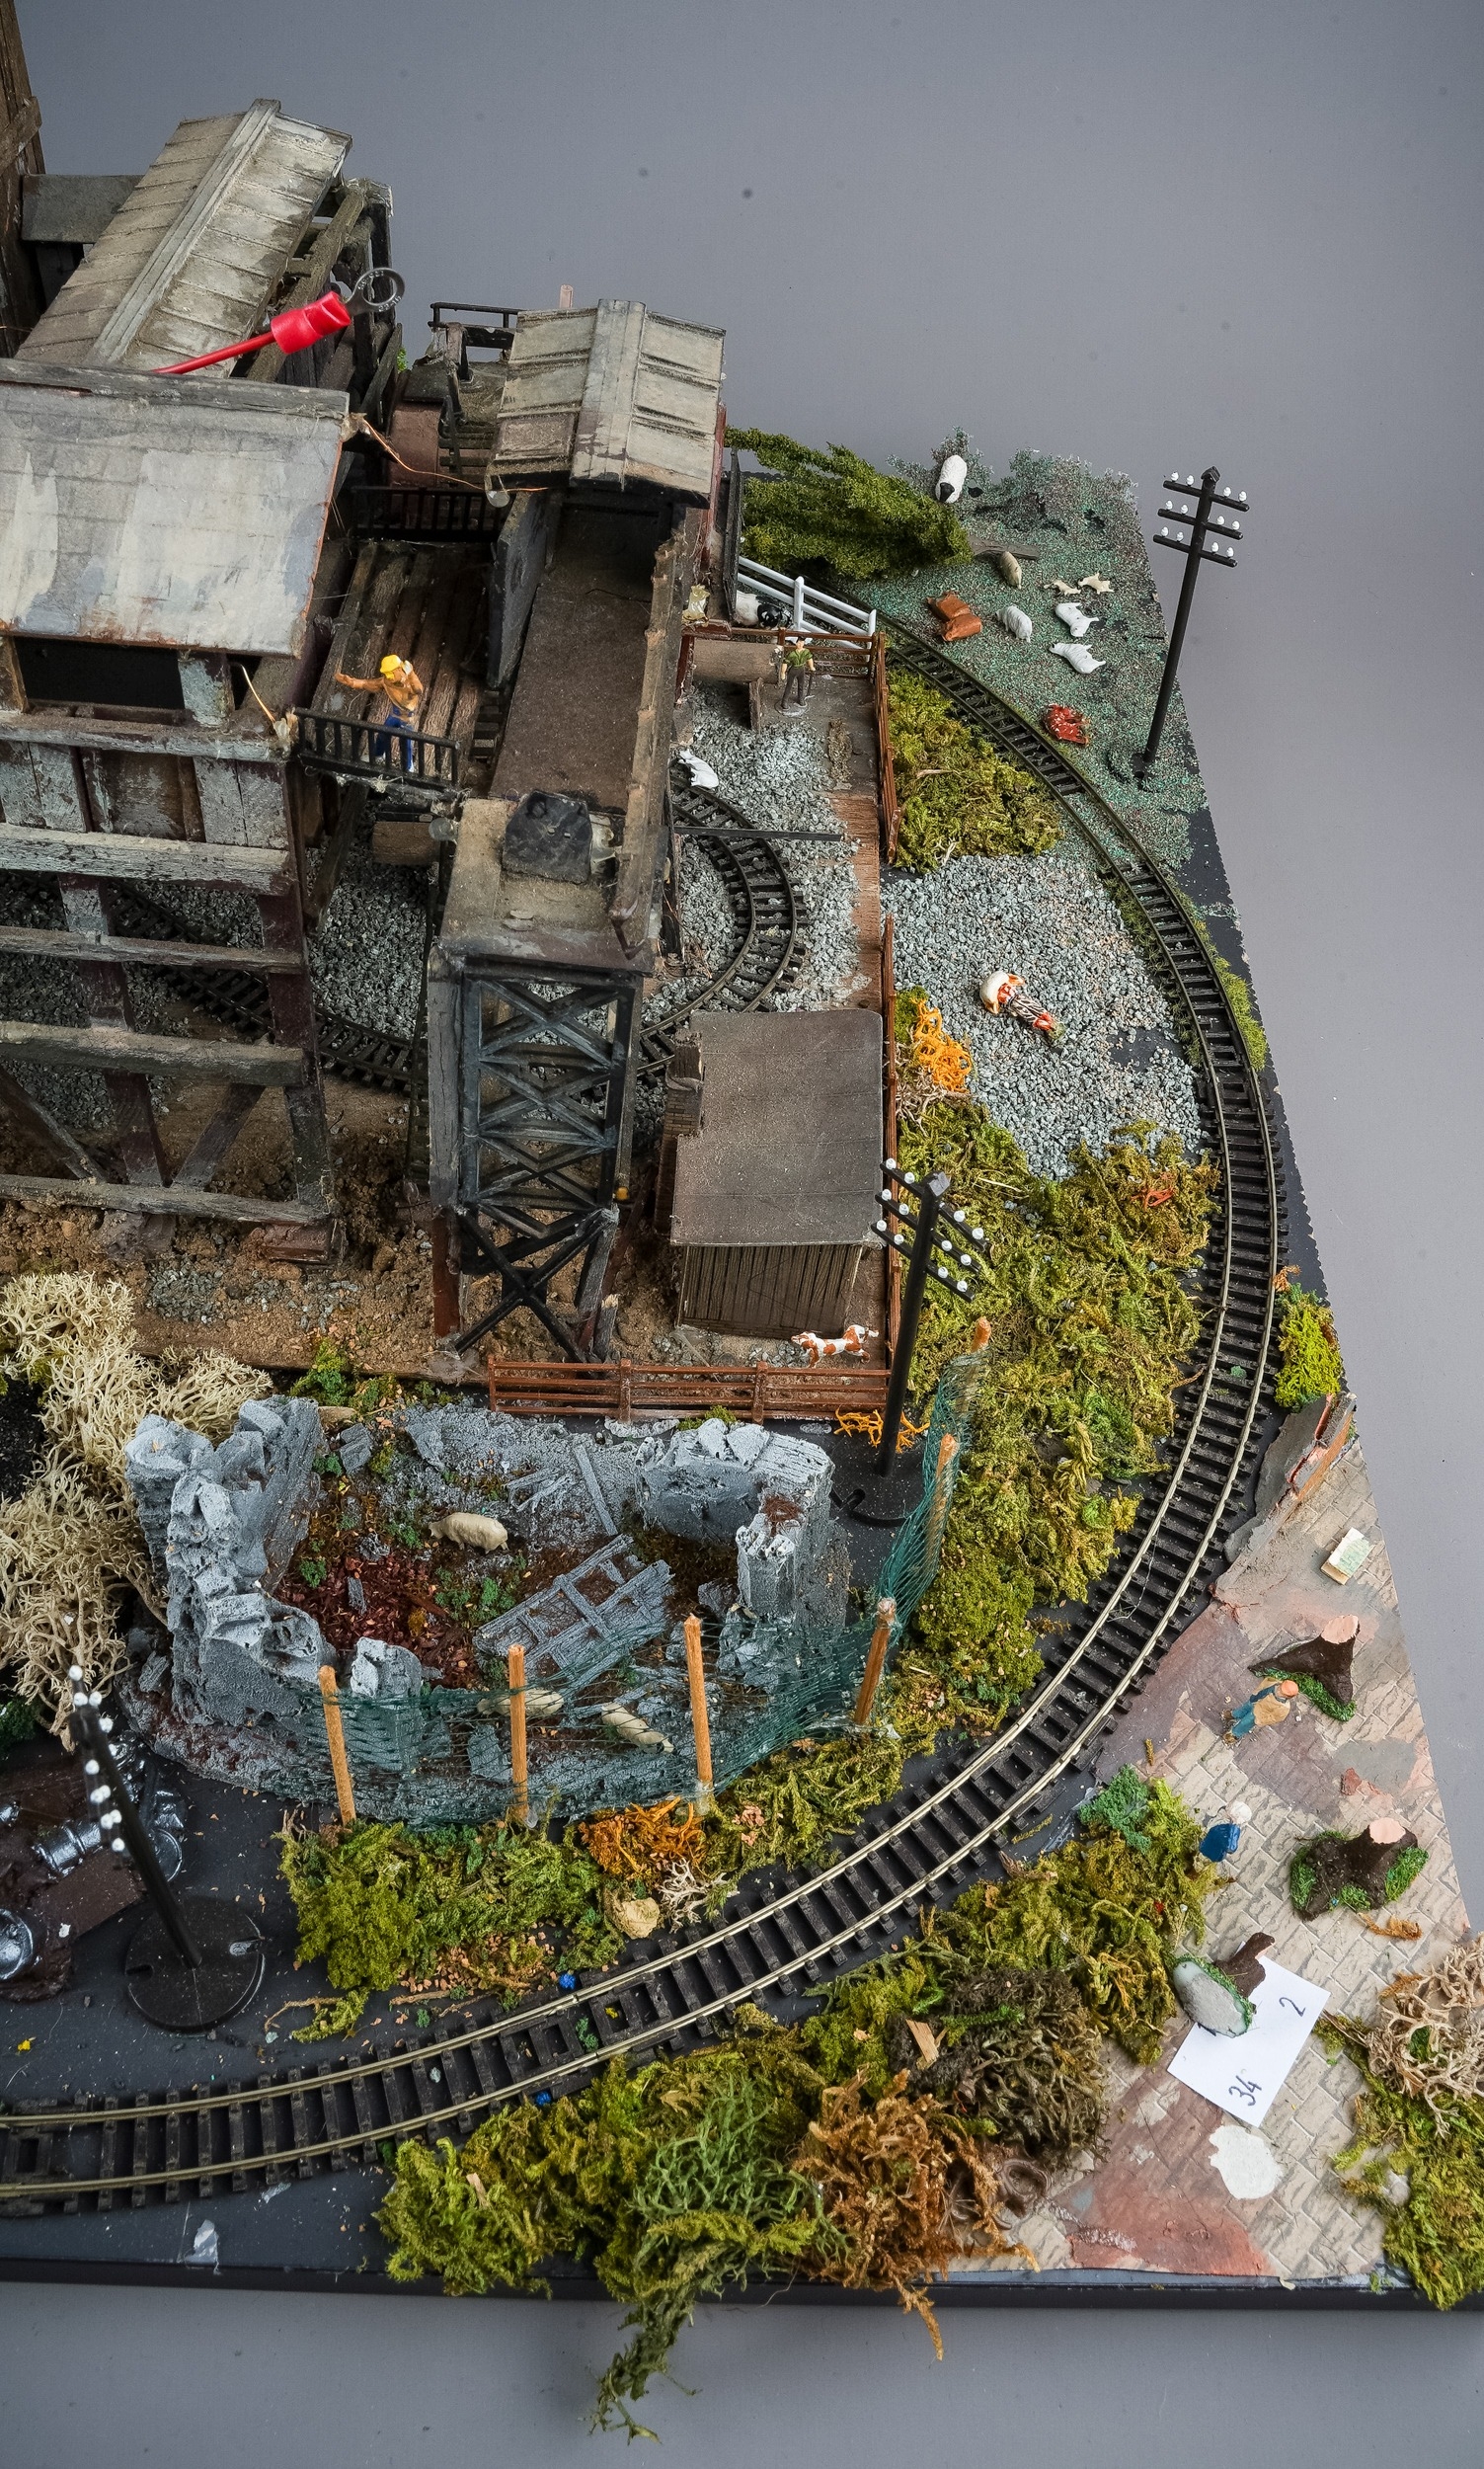 A model railway N gauge layout board containing diorama depicting coal mine processing plant with - Image 8 of 9